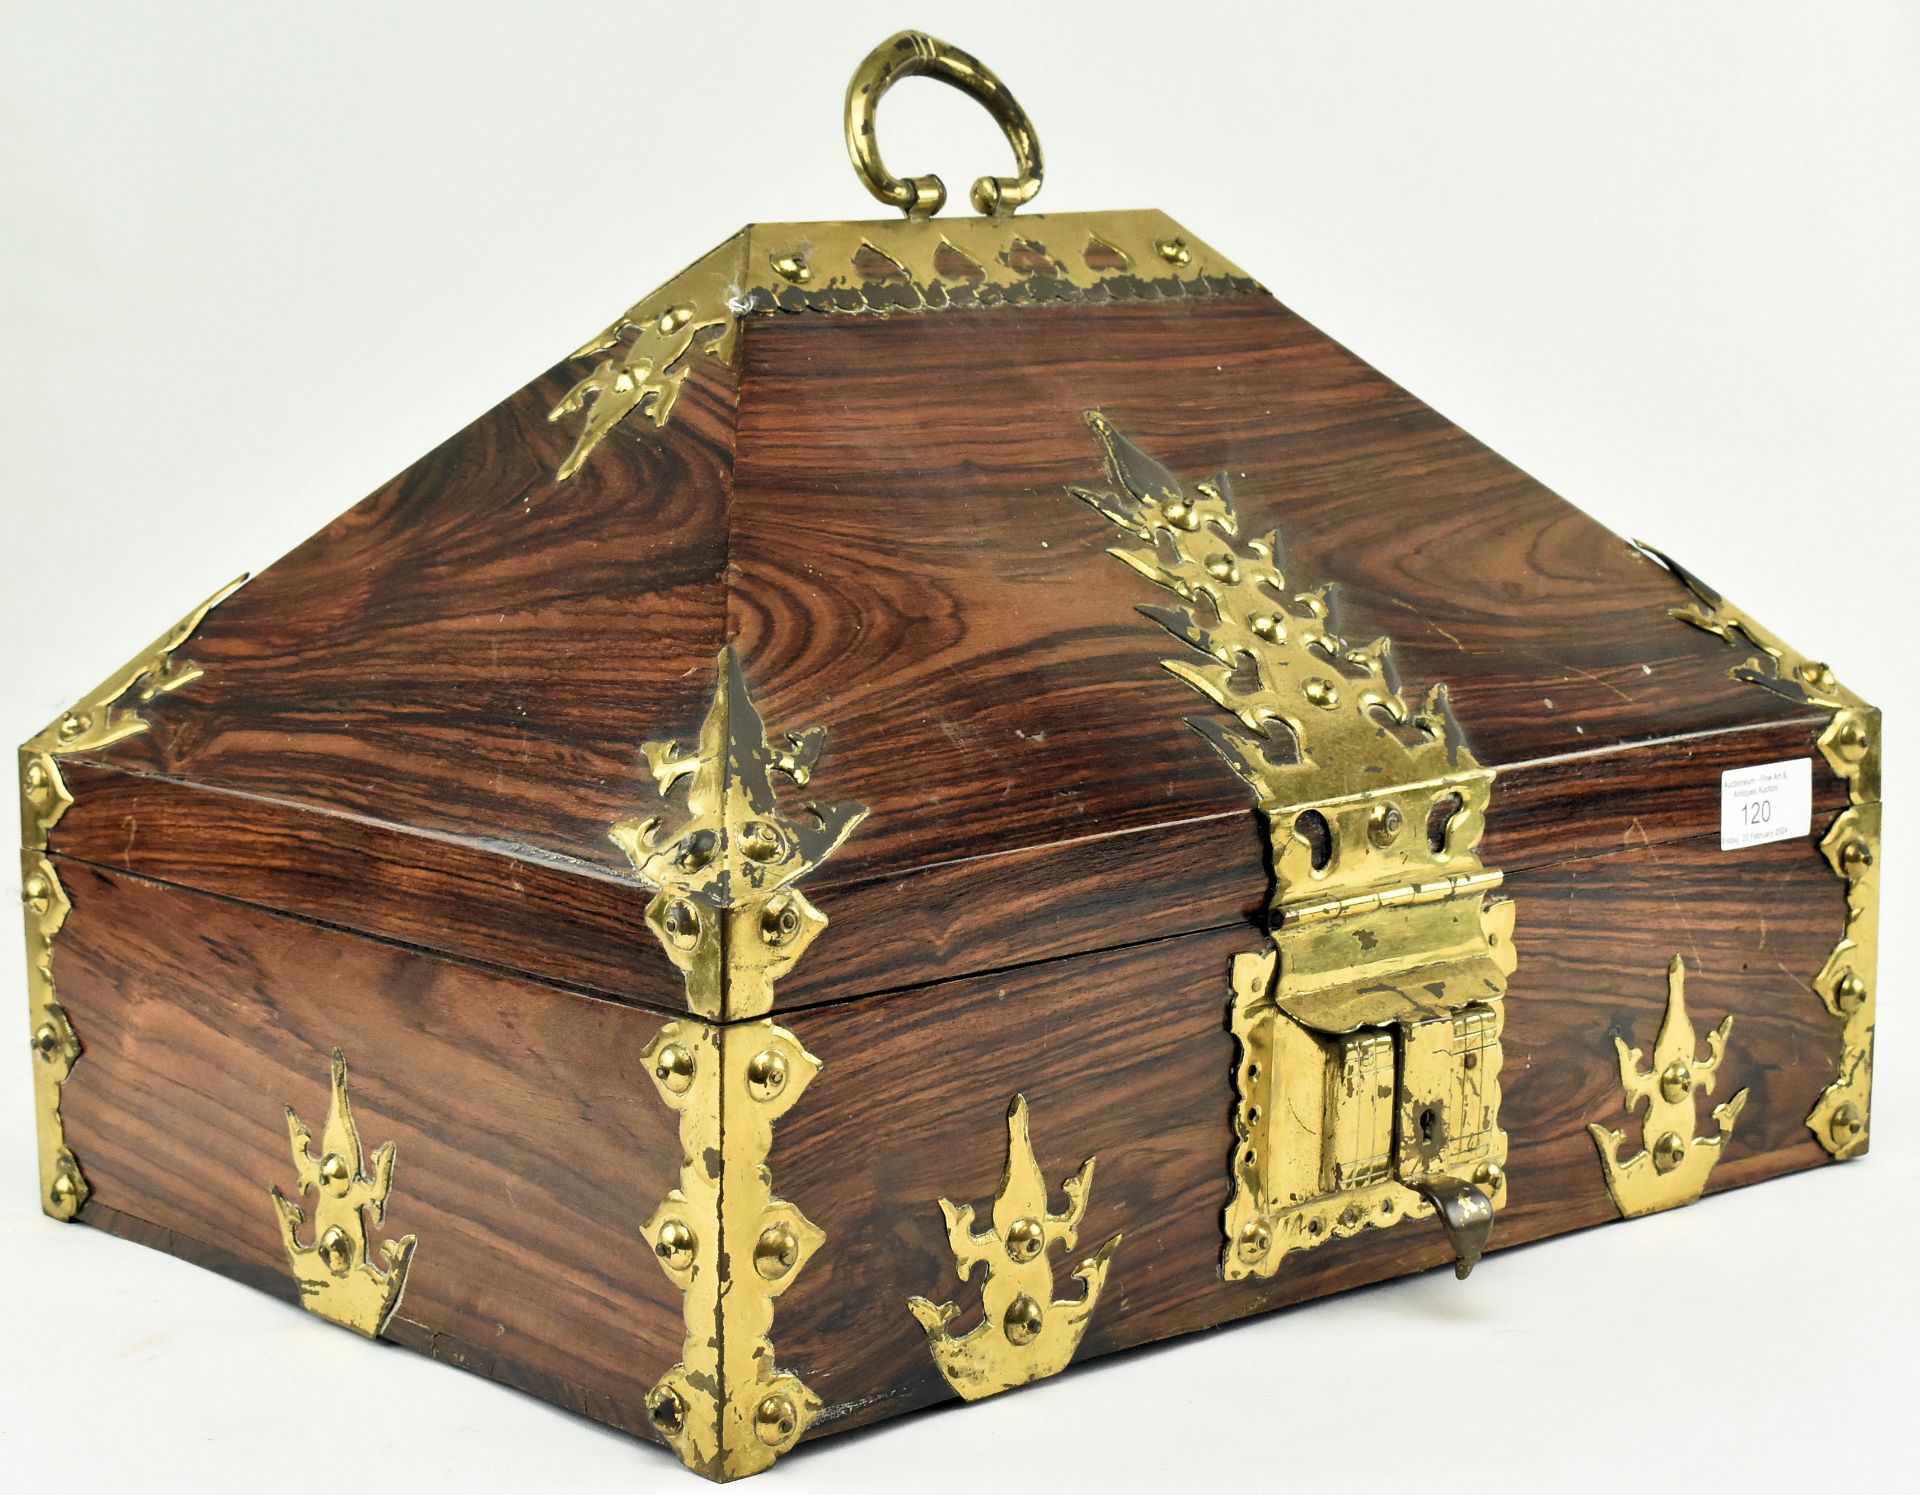 SOUTH INDIAN ROSEWOOD & GILDED METAL DOWRY BOX